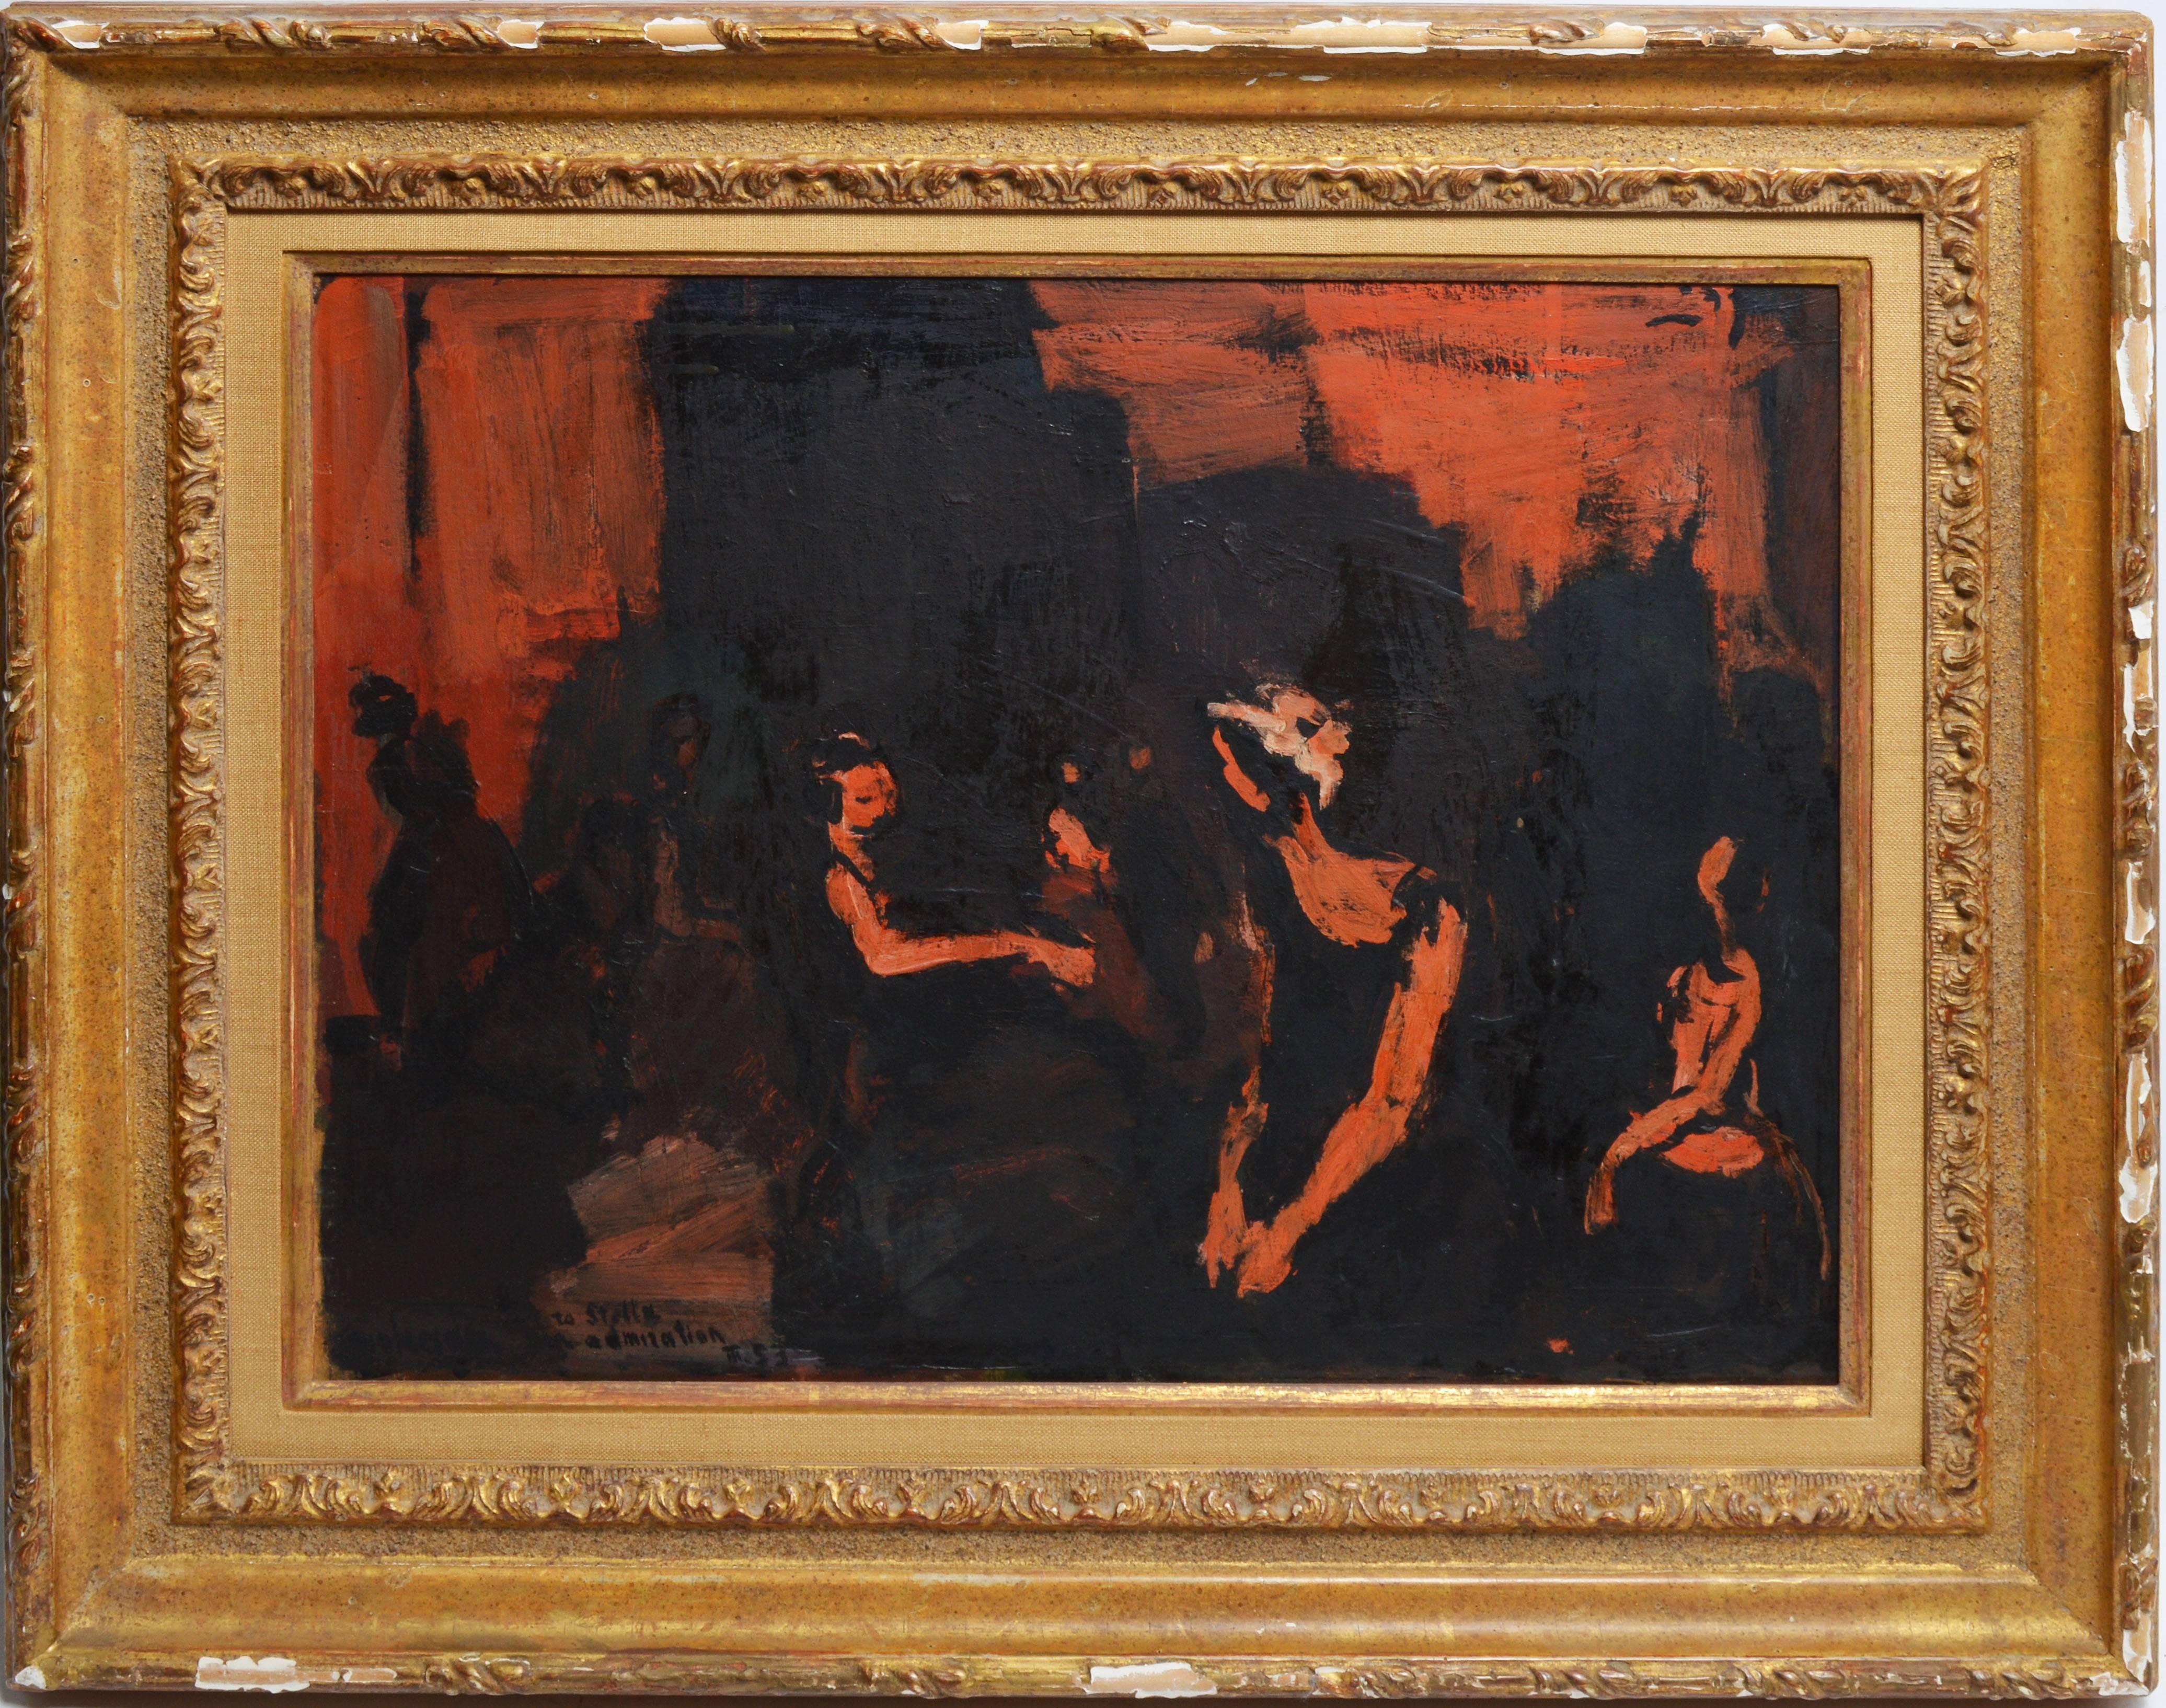 Modernist-style painting of dancers by Moshe Mokady (1902-1975). Oil on board, circa 1950. Signed lower left, &quot;Mokady&quot;. Displayed in a period frame. Image size, 18&quot;L x 14&quot;H, overall 25&quot;L x 21&quot;H
